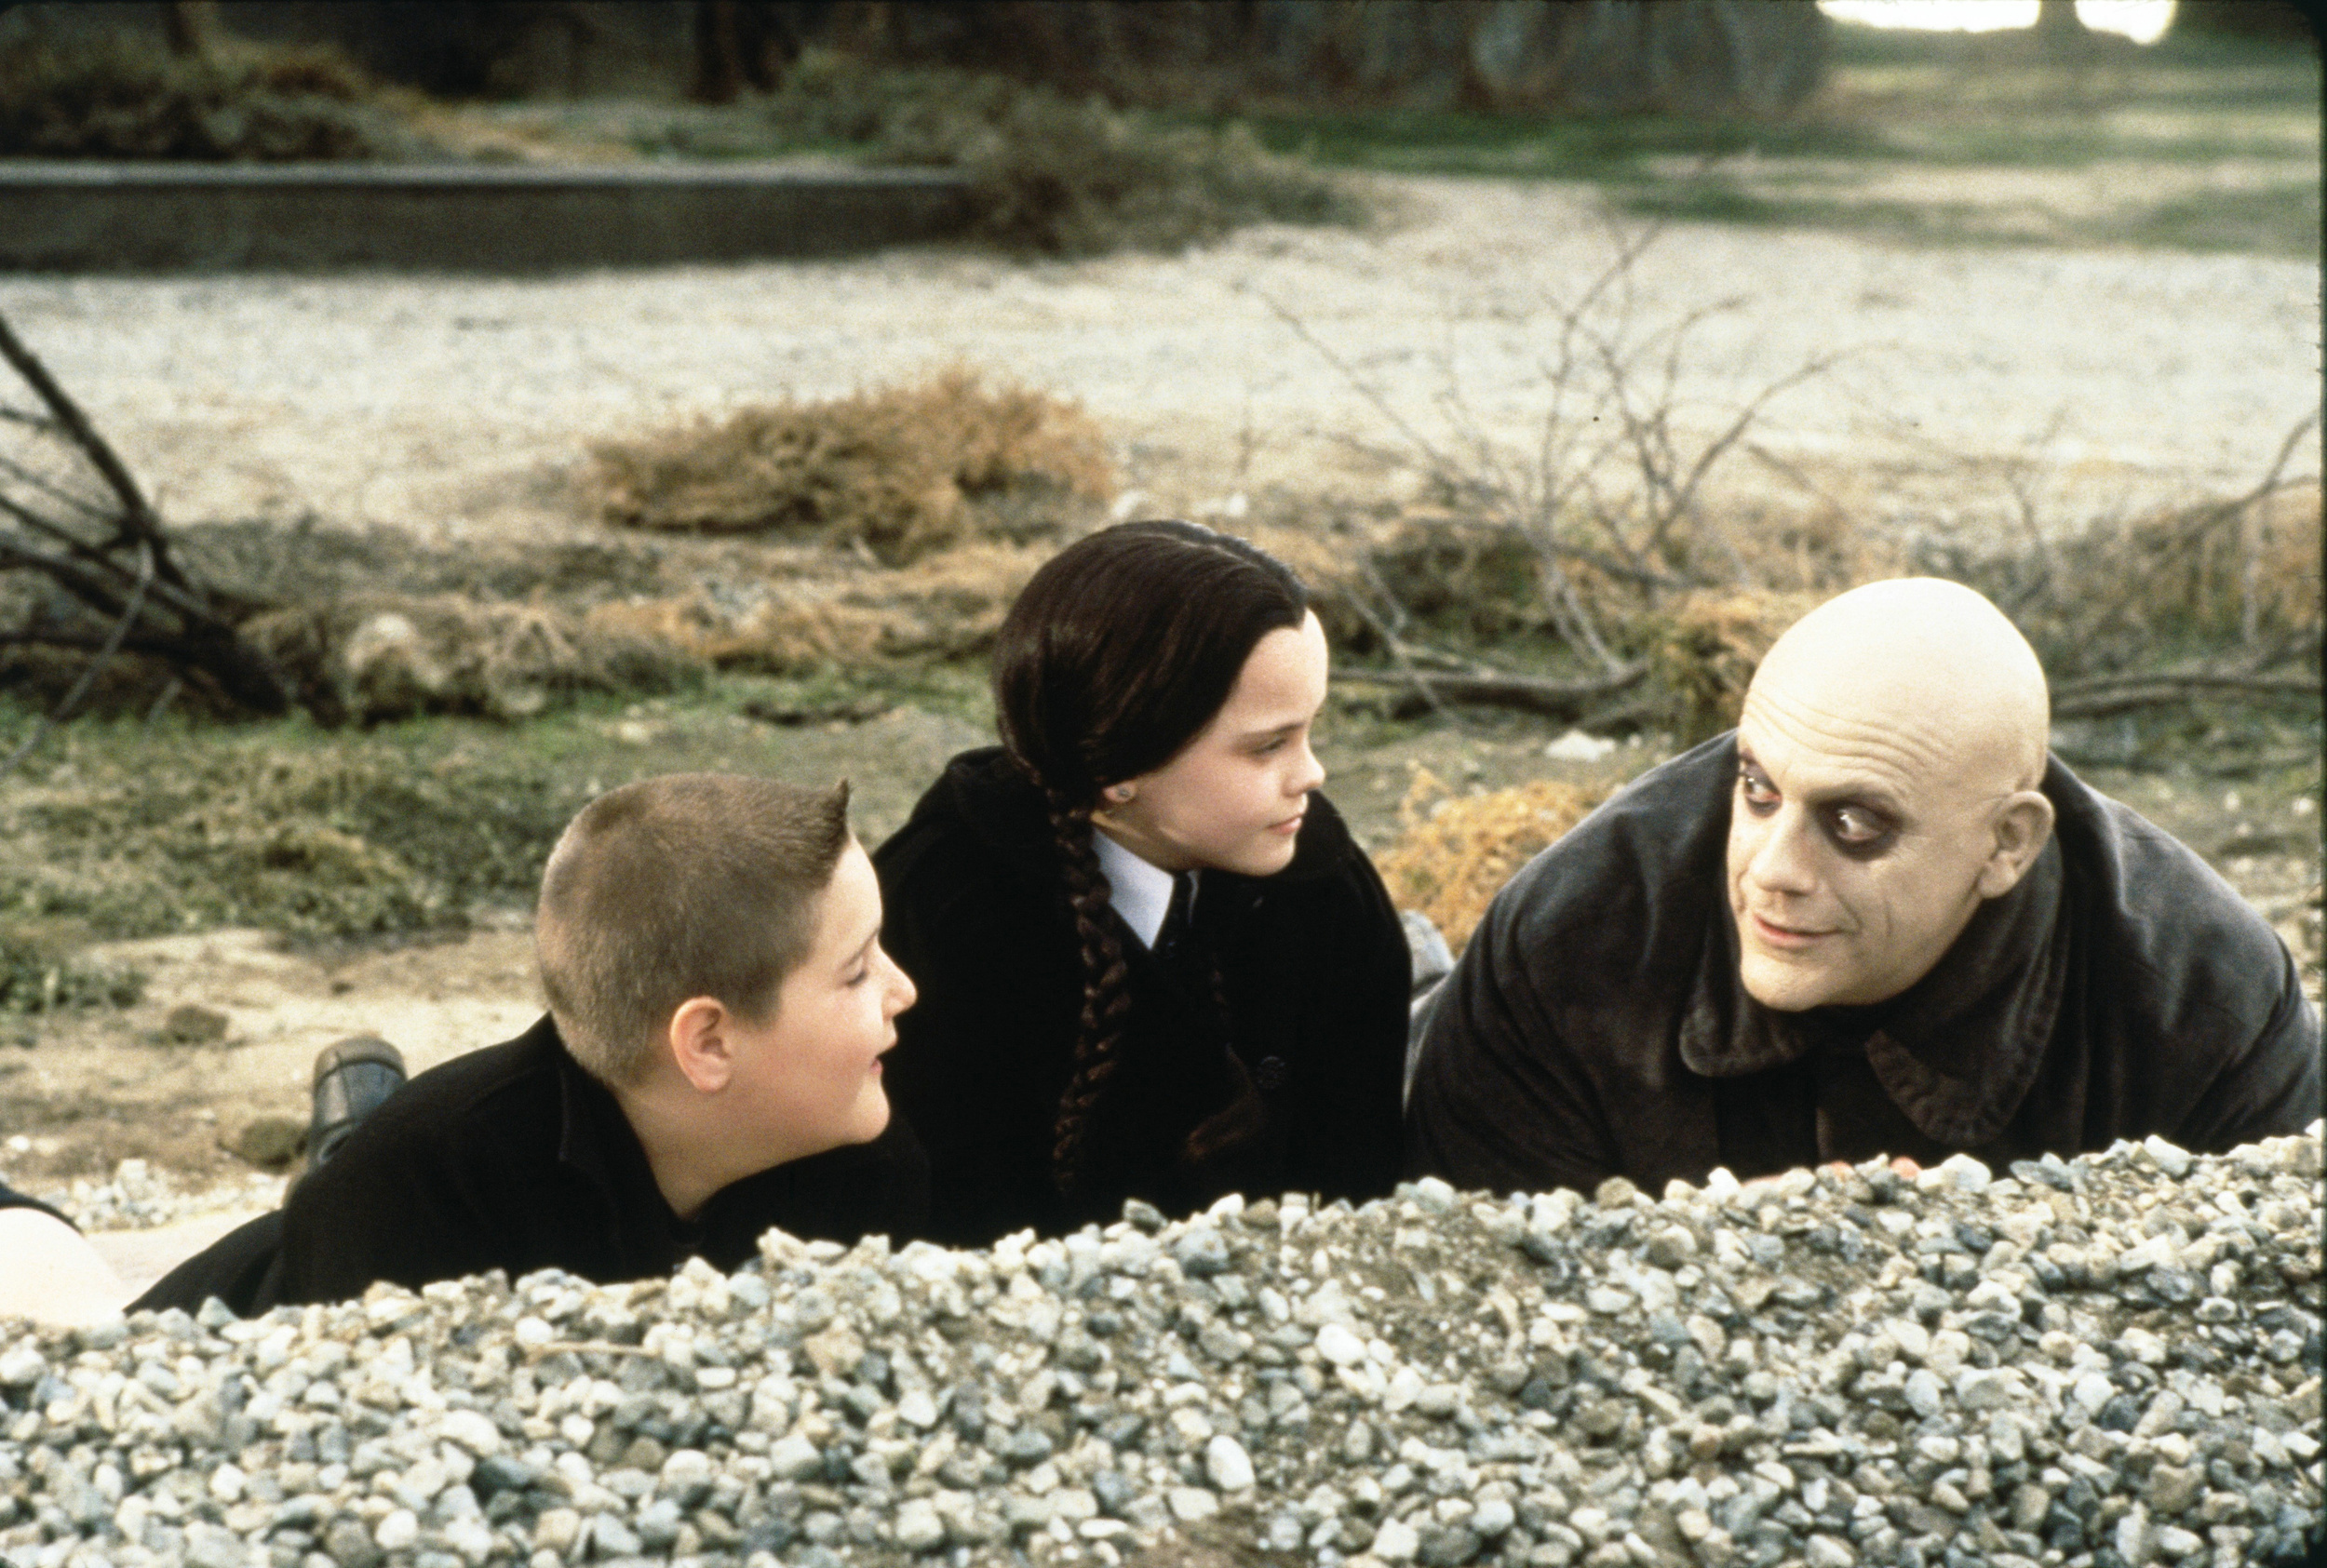 <p>In the <em>Addams Family</em> TV show, Fester is Morticia’s uncle, and Grandmama is Gomez’s mother. However, in this film, Fester is Gomez’s brother and Grandmama becomes Morticia’s mom. This has been the accepted canon ever since.</p><p><a href='https://www.msn.com/en-us/community/channel/vid-cj9pqbr0vn9in2b6ddcd8sfgpfq6x6utp44fssrv6mc2gtybw0us'>Follow us on MSN to see more of our exclusive entertainment content.</a></p>